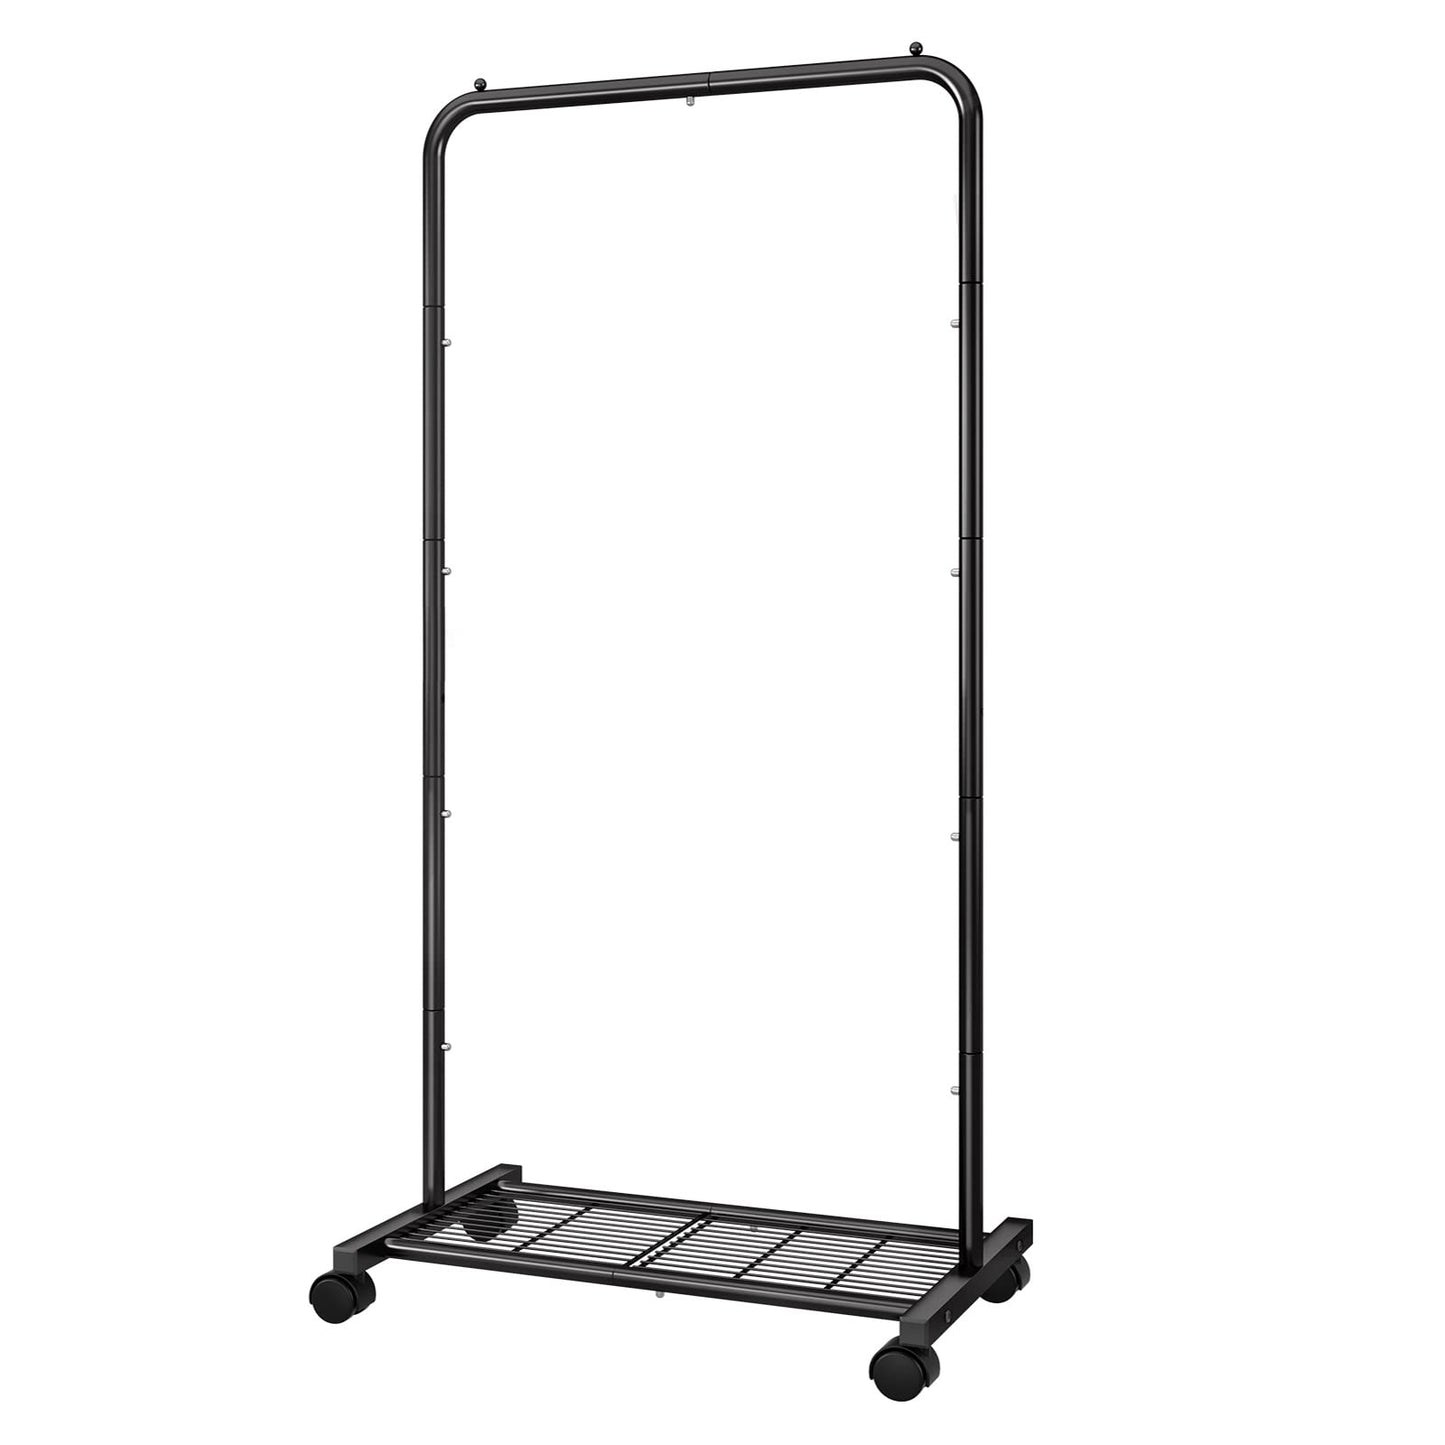 Simple Trending Standard Clothes Garment Rack, Clothing Rolling Rack with Mesh Storage Shelf on Wheels